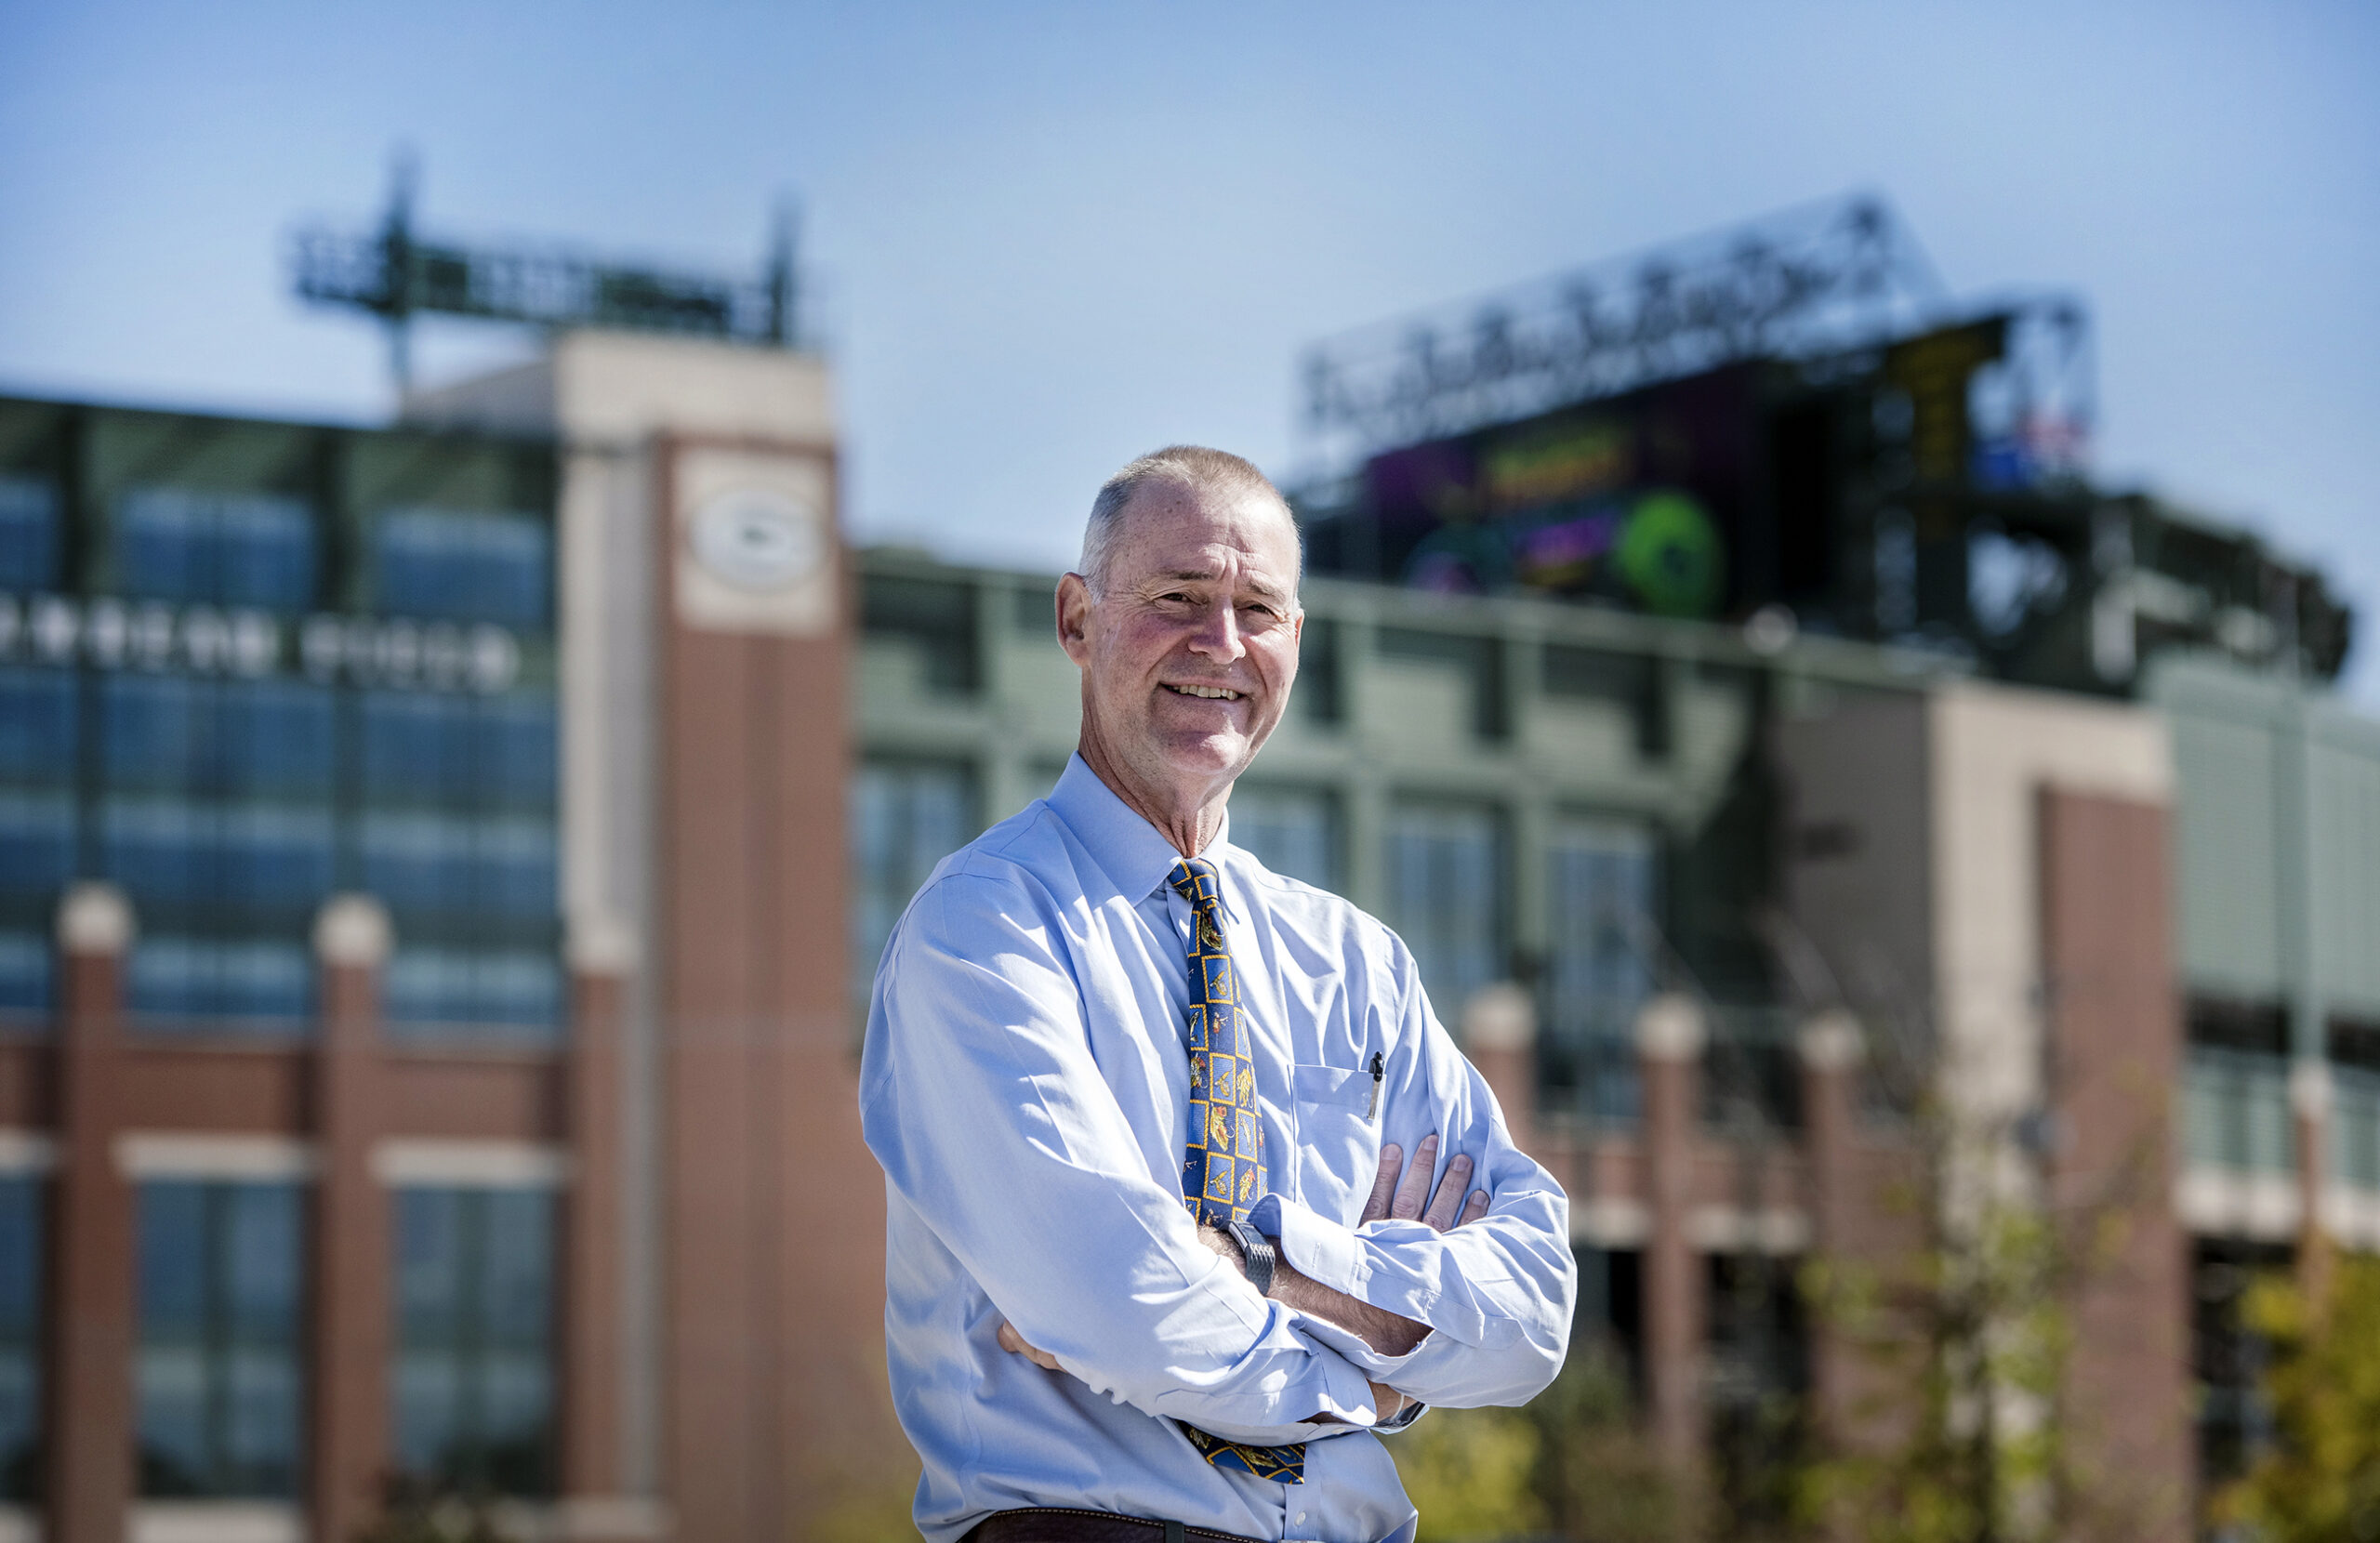 Dr. Anderson stands with his arms crossed on a sunny day. Lambeau Field can be seen behind him.